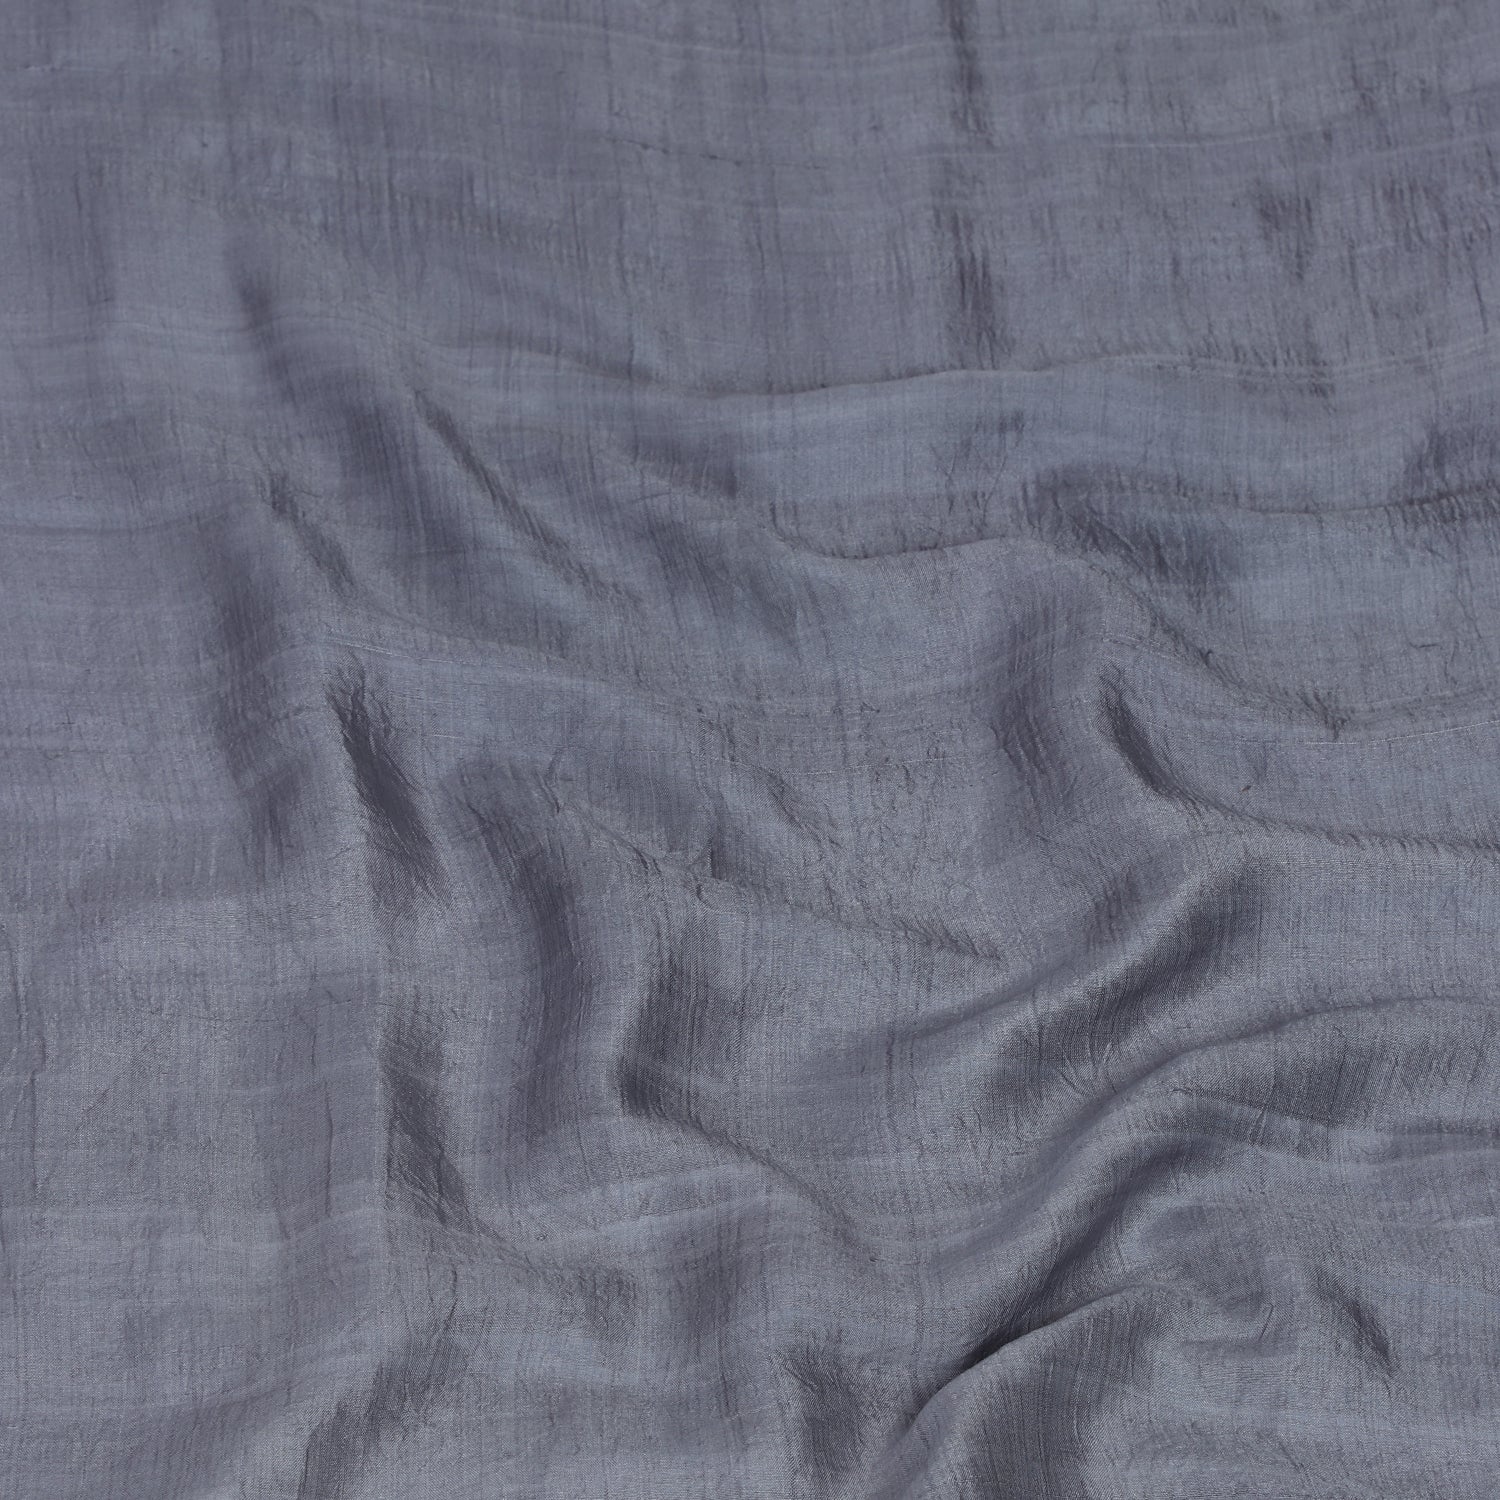 Grey Color Embroidered Mulberry Silk Stole